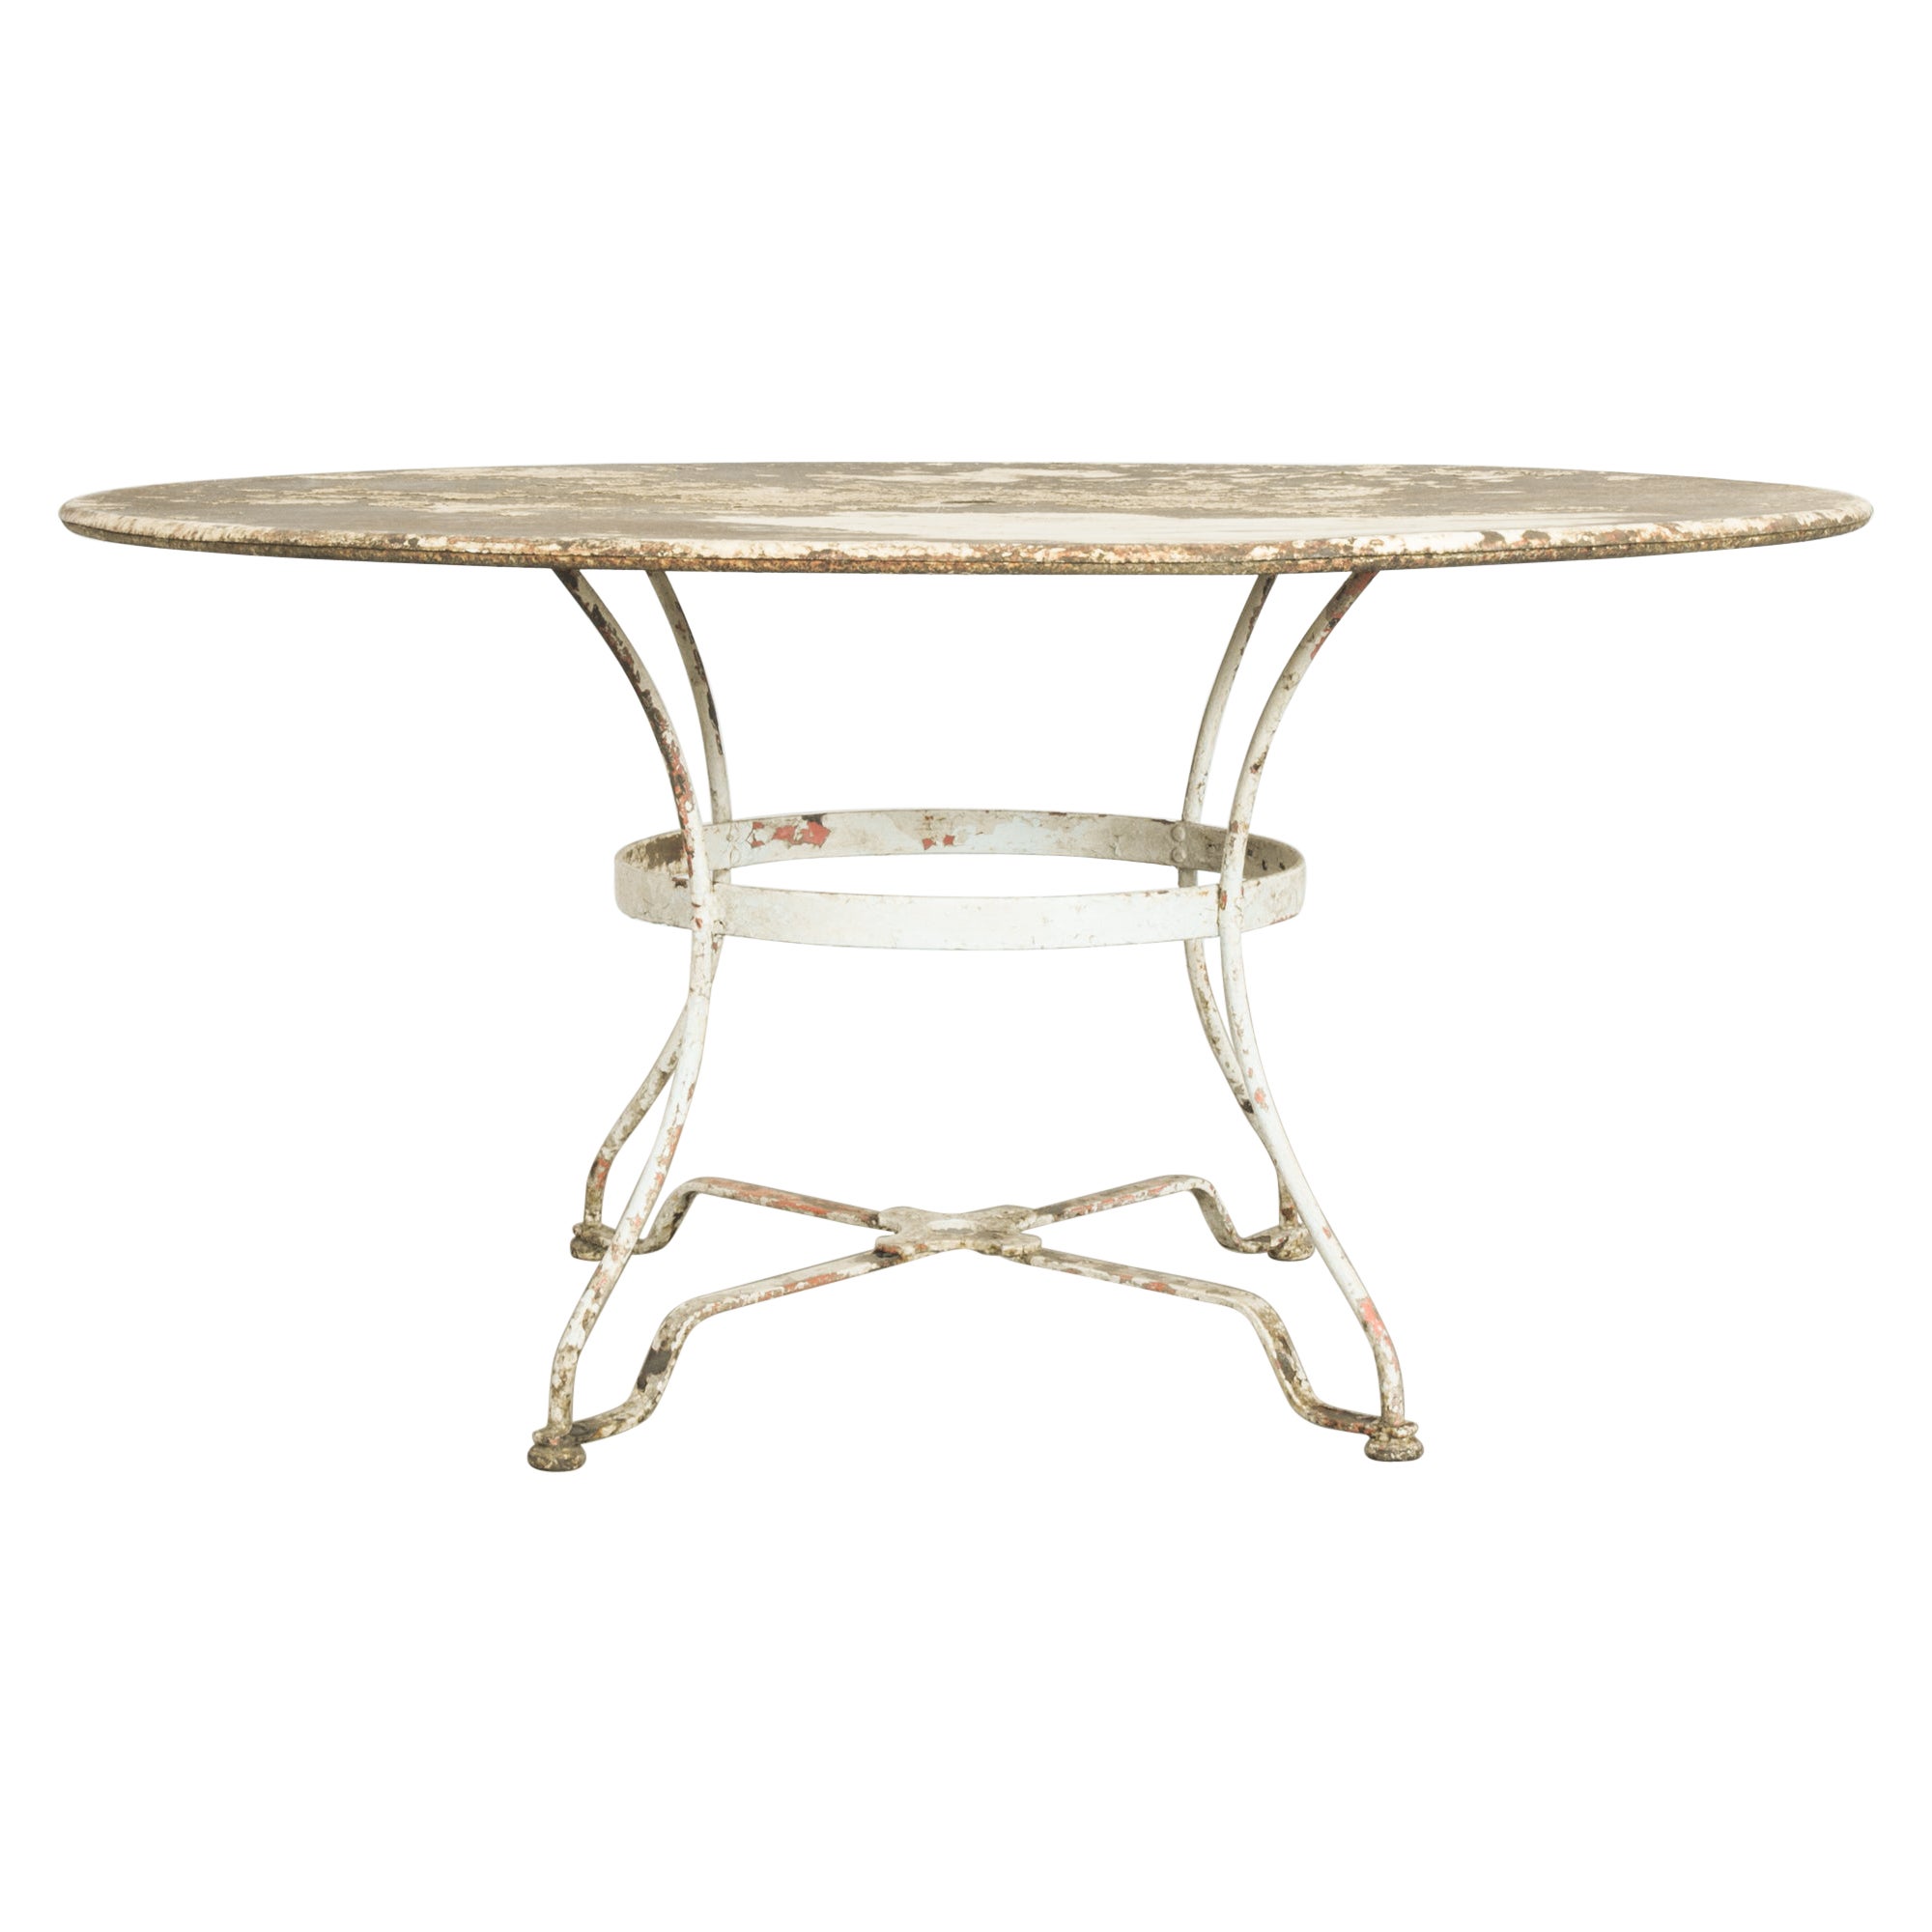 1920s French White Patinated Metal Table